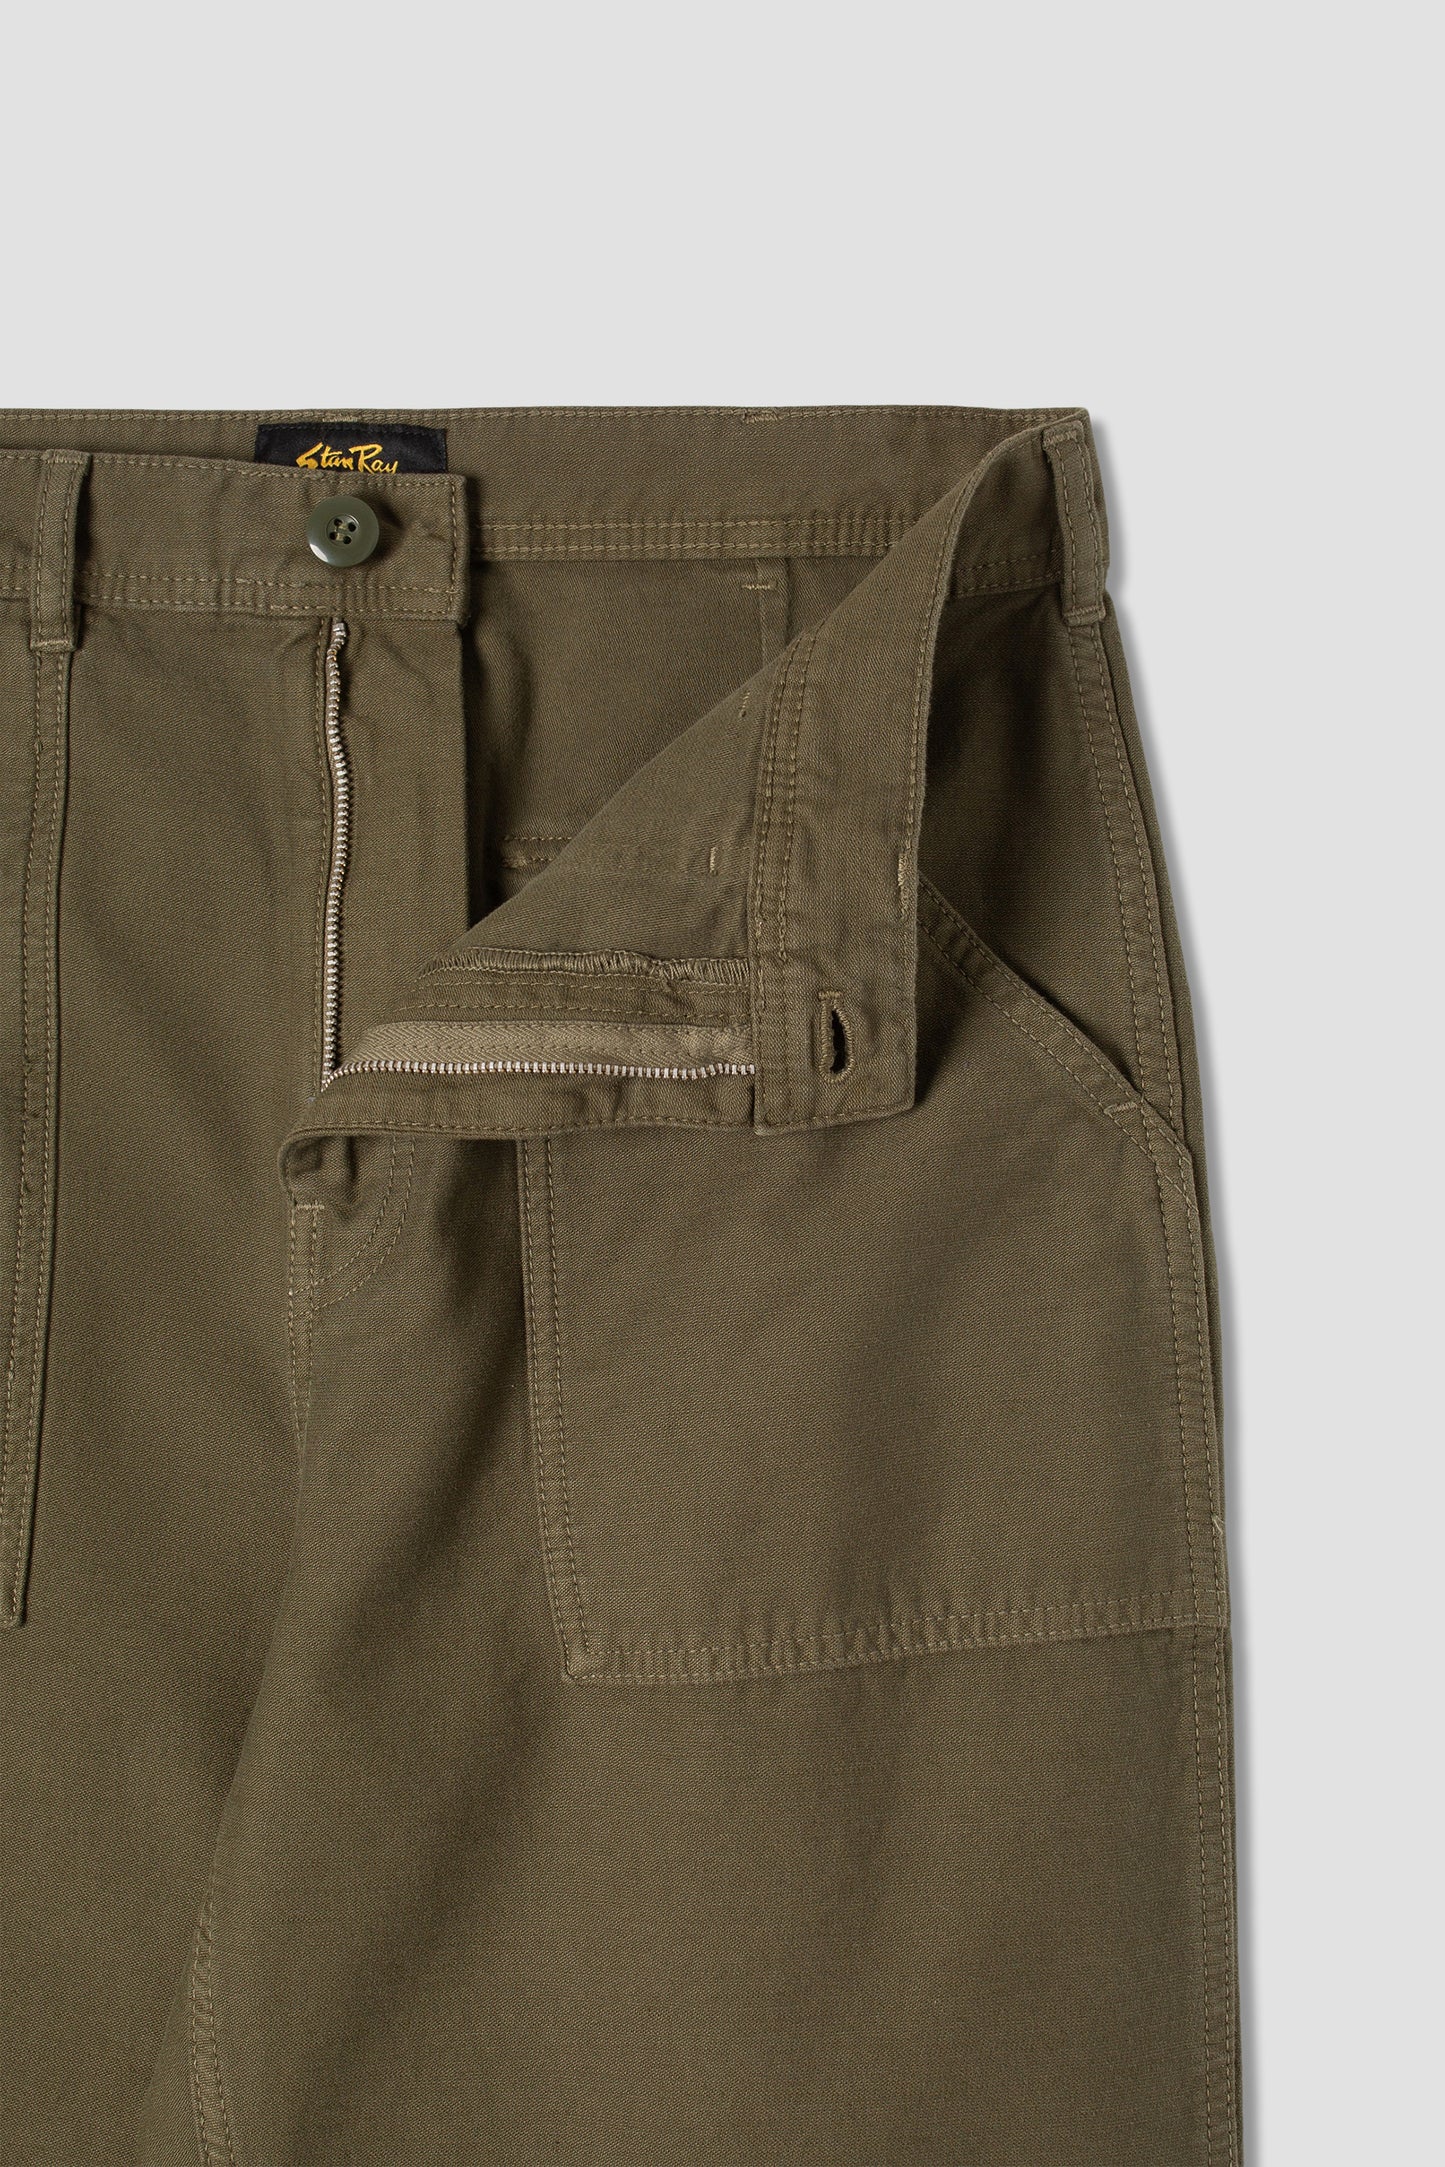 Fat Pant (Olive Sateen)